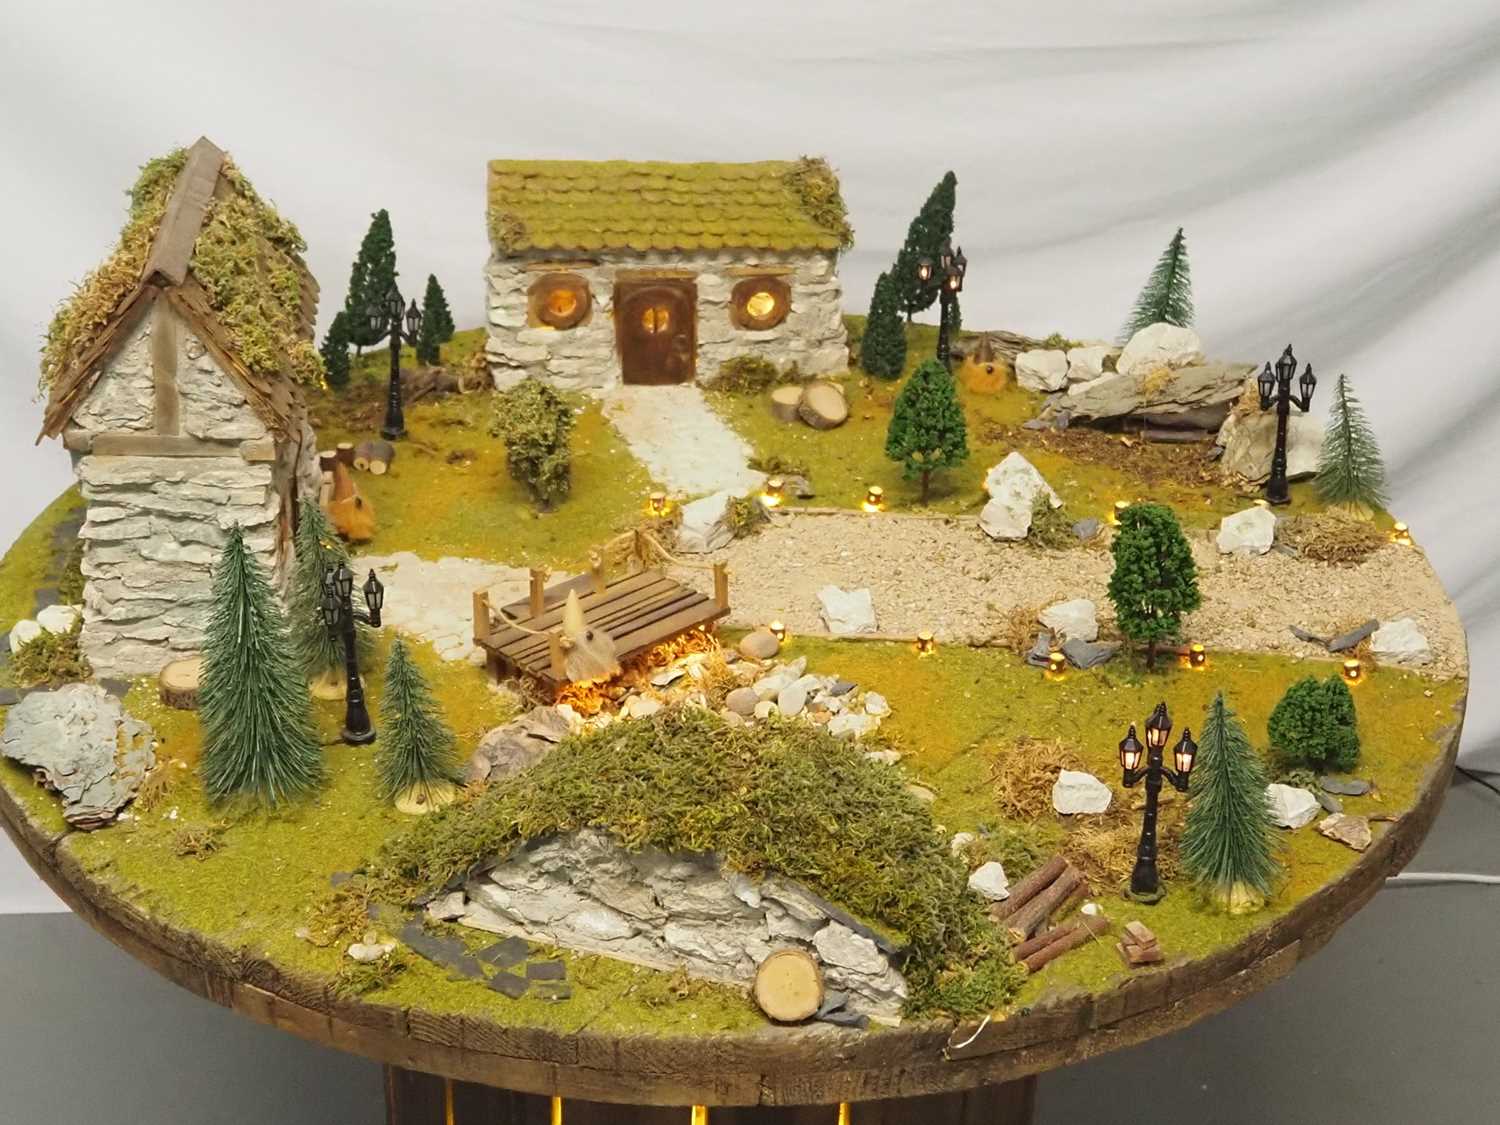 Nick Zammeti cable reel table top model hamlet diorama - Nick says 'How can you make a Miniature - Image 3 of 12